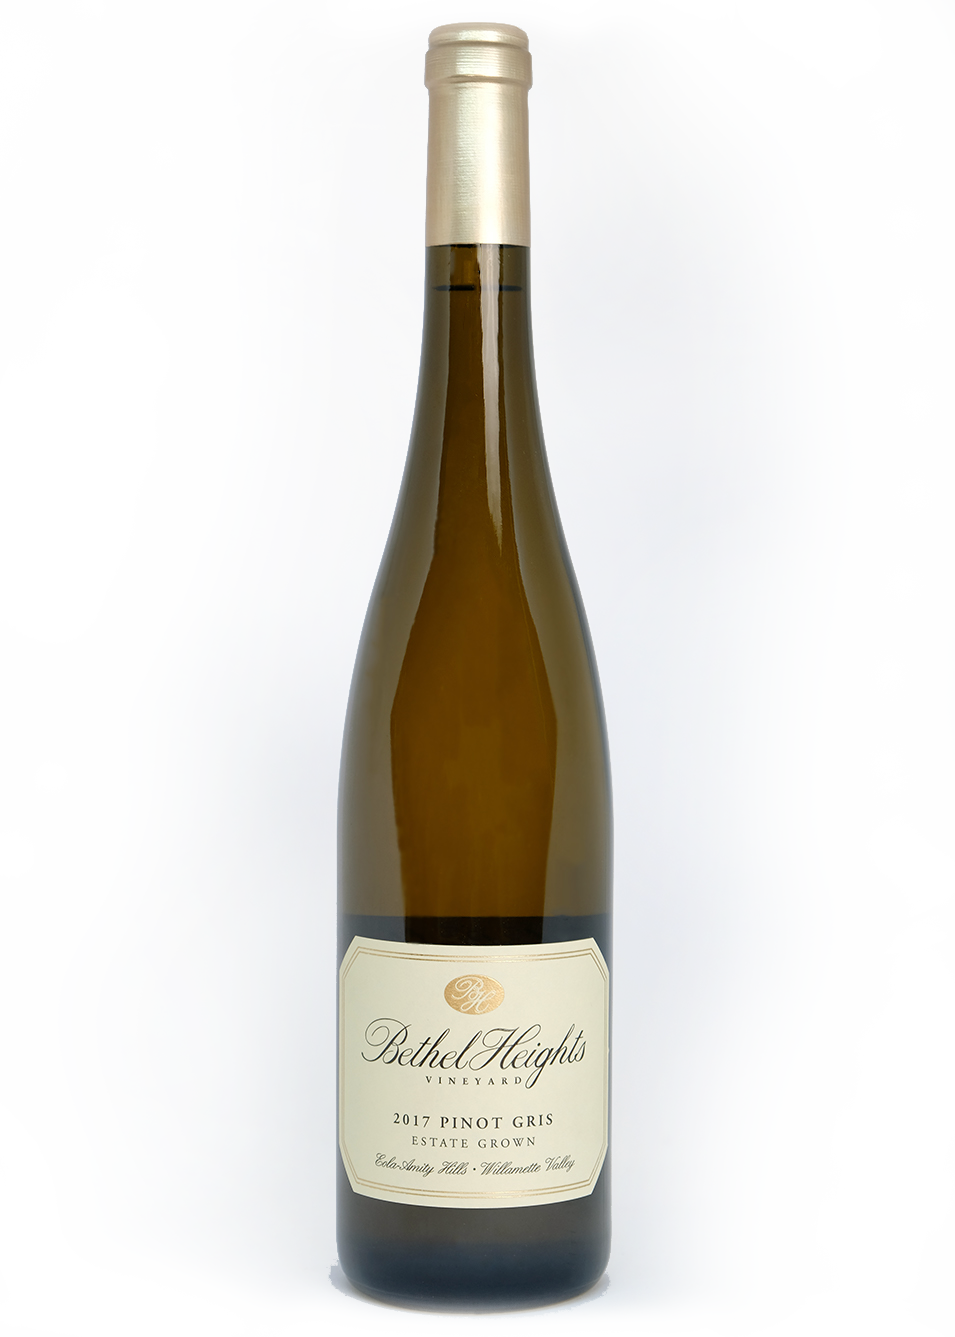 Bethel Heights 2017 Pinot Gris